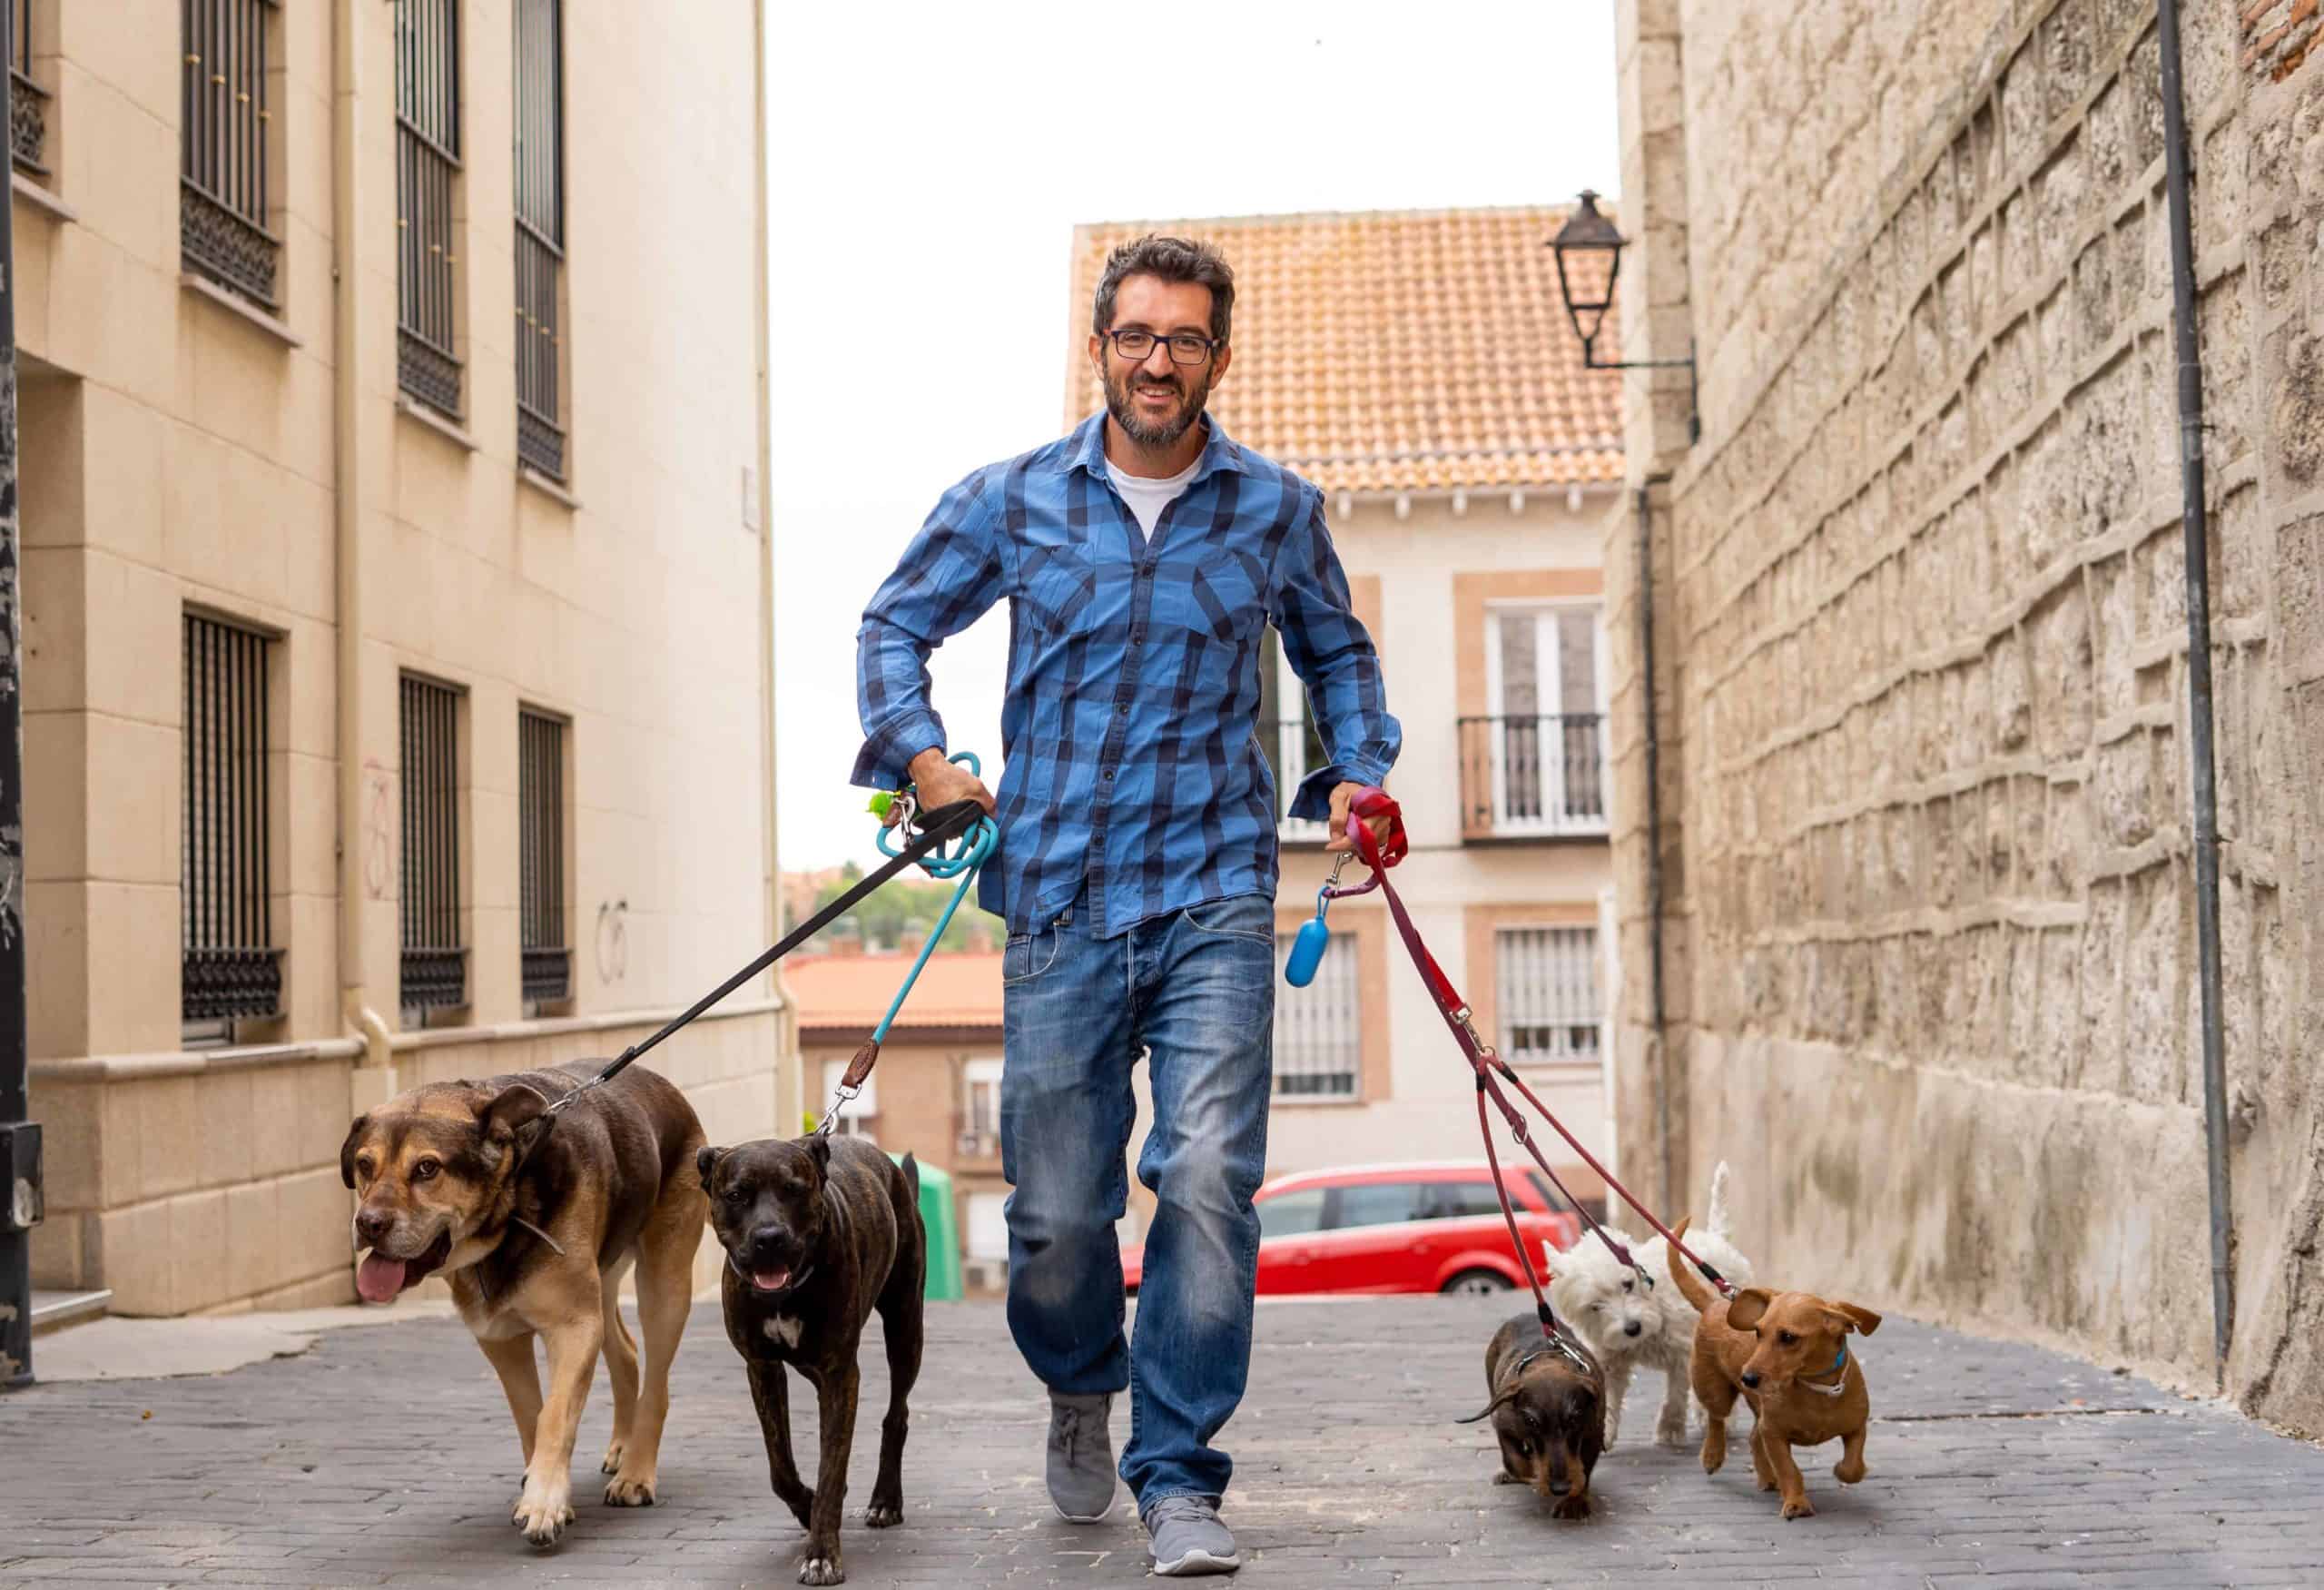 Professional dog walker walks five dogs. When choosing a dog walking service, check recommendations, review qualifications, and meet the dog walker before hiring.